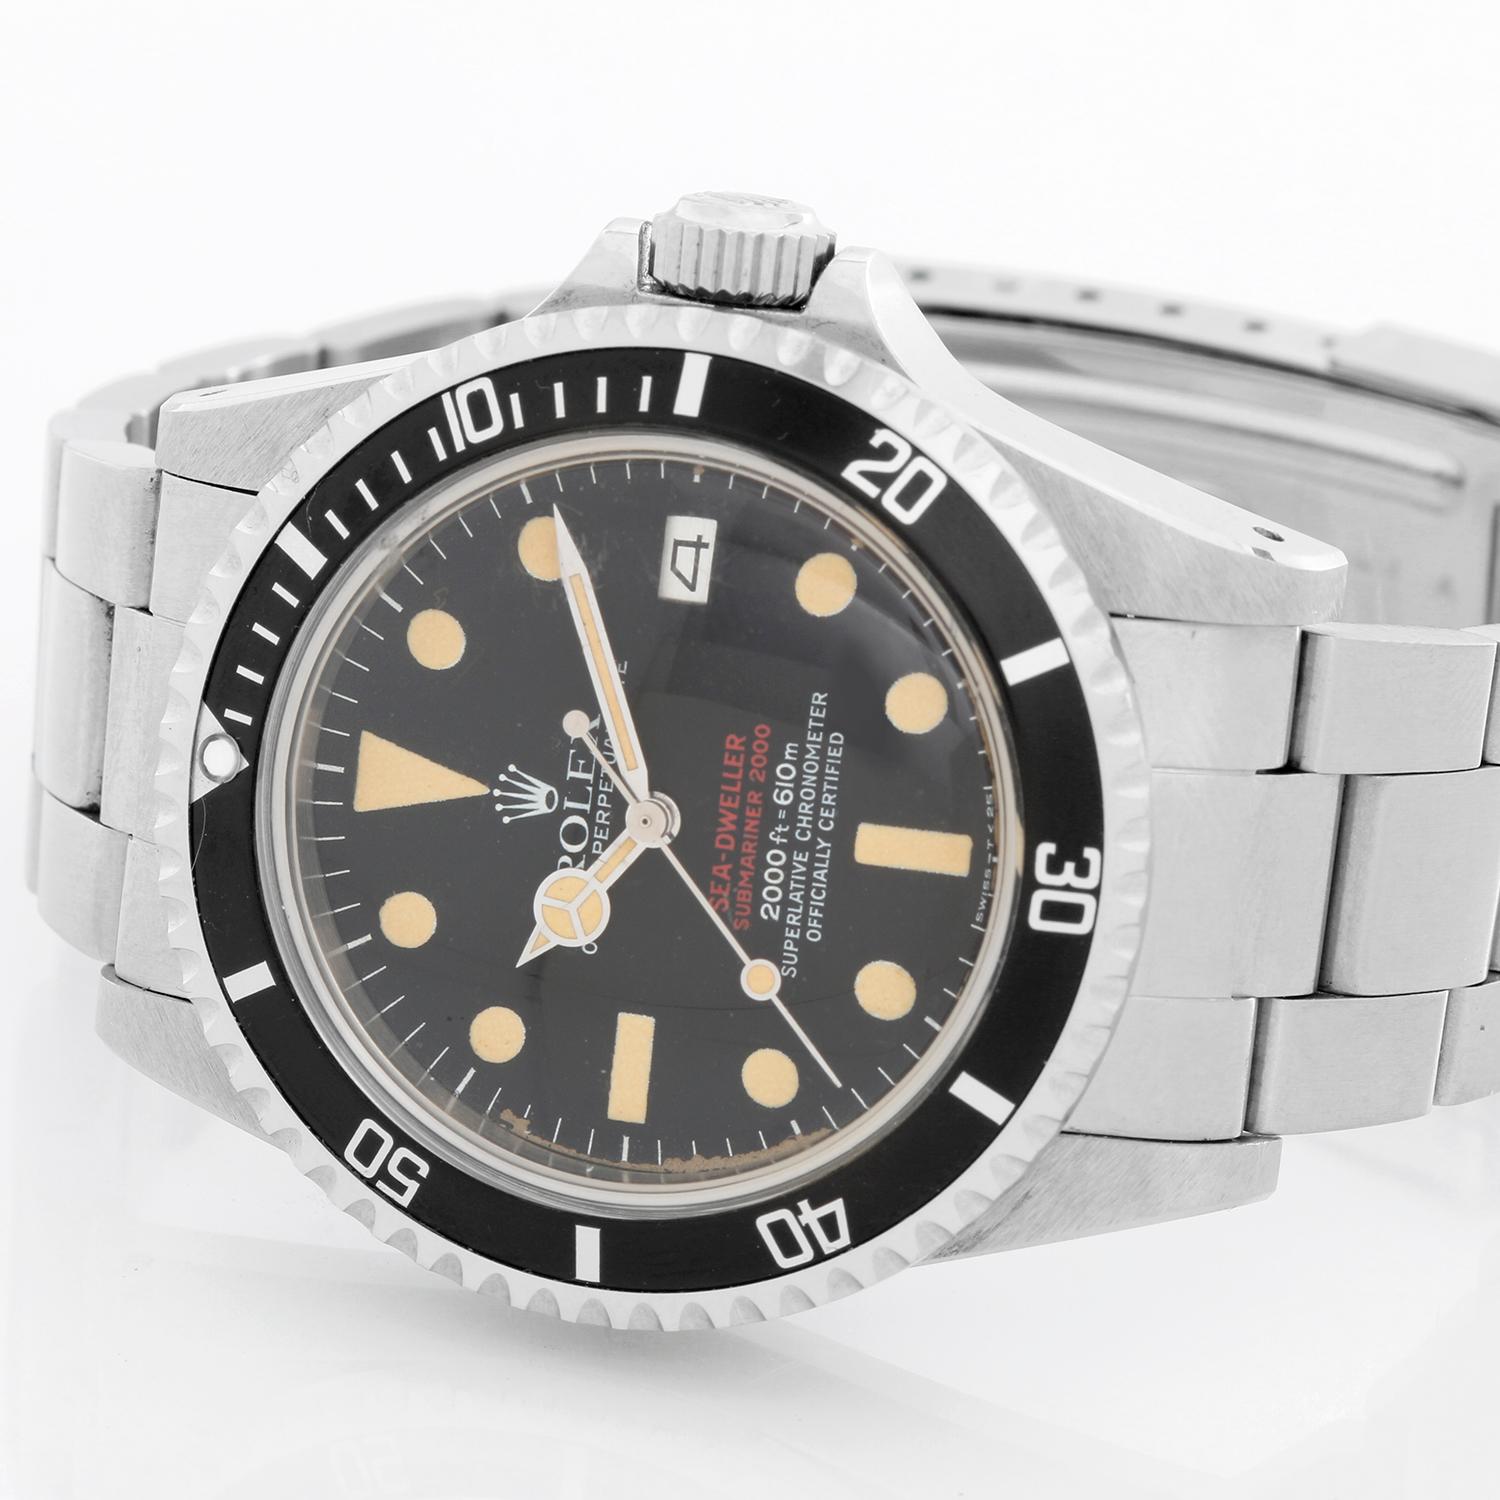 Rare Collectible Vintage Rolex Double Red DRSD Sea Dweller Men's Steel Watch 1665 - Automatic winding with date; acrylic crystal. Stainless steel case (40mm diameter). Case back signed on back; Rolex Oyster Original Gas Escape Value. Black dial with